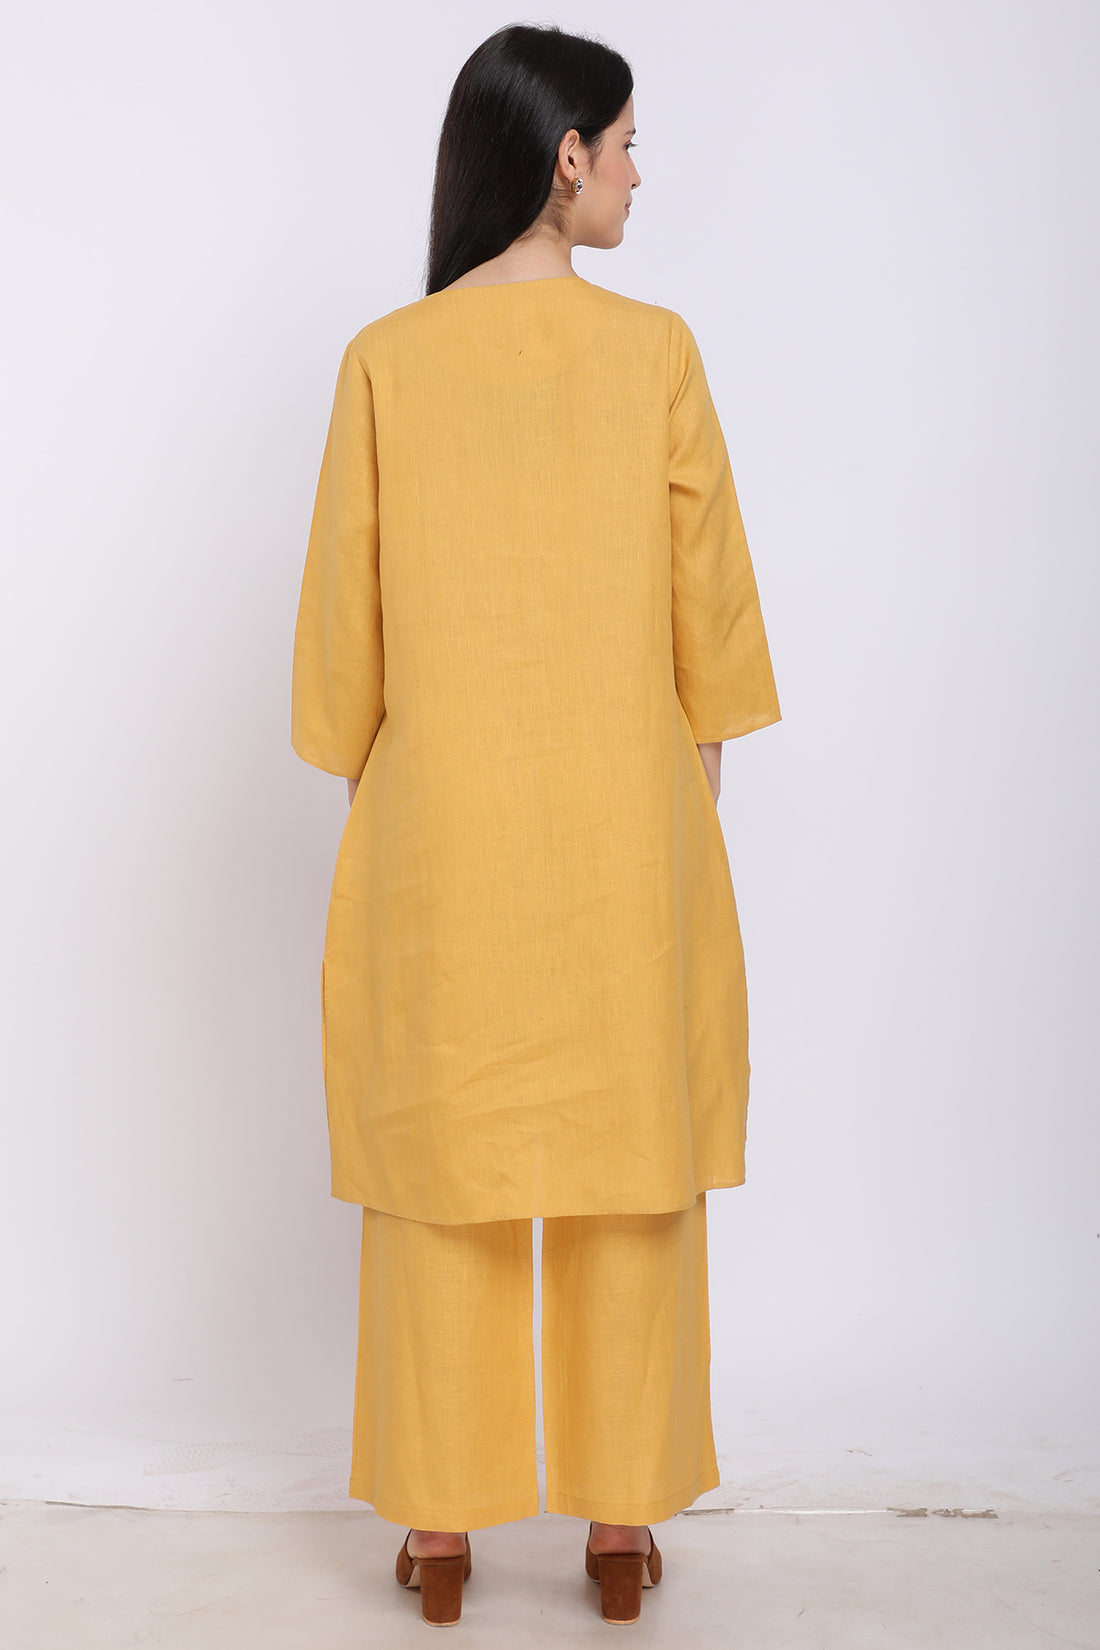 Ochre Hand Embroidered Tunic